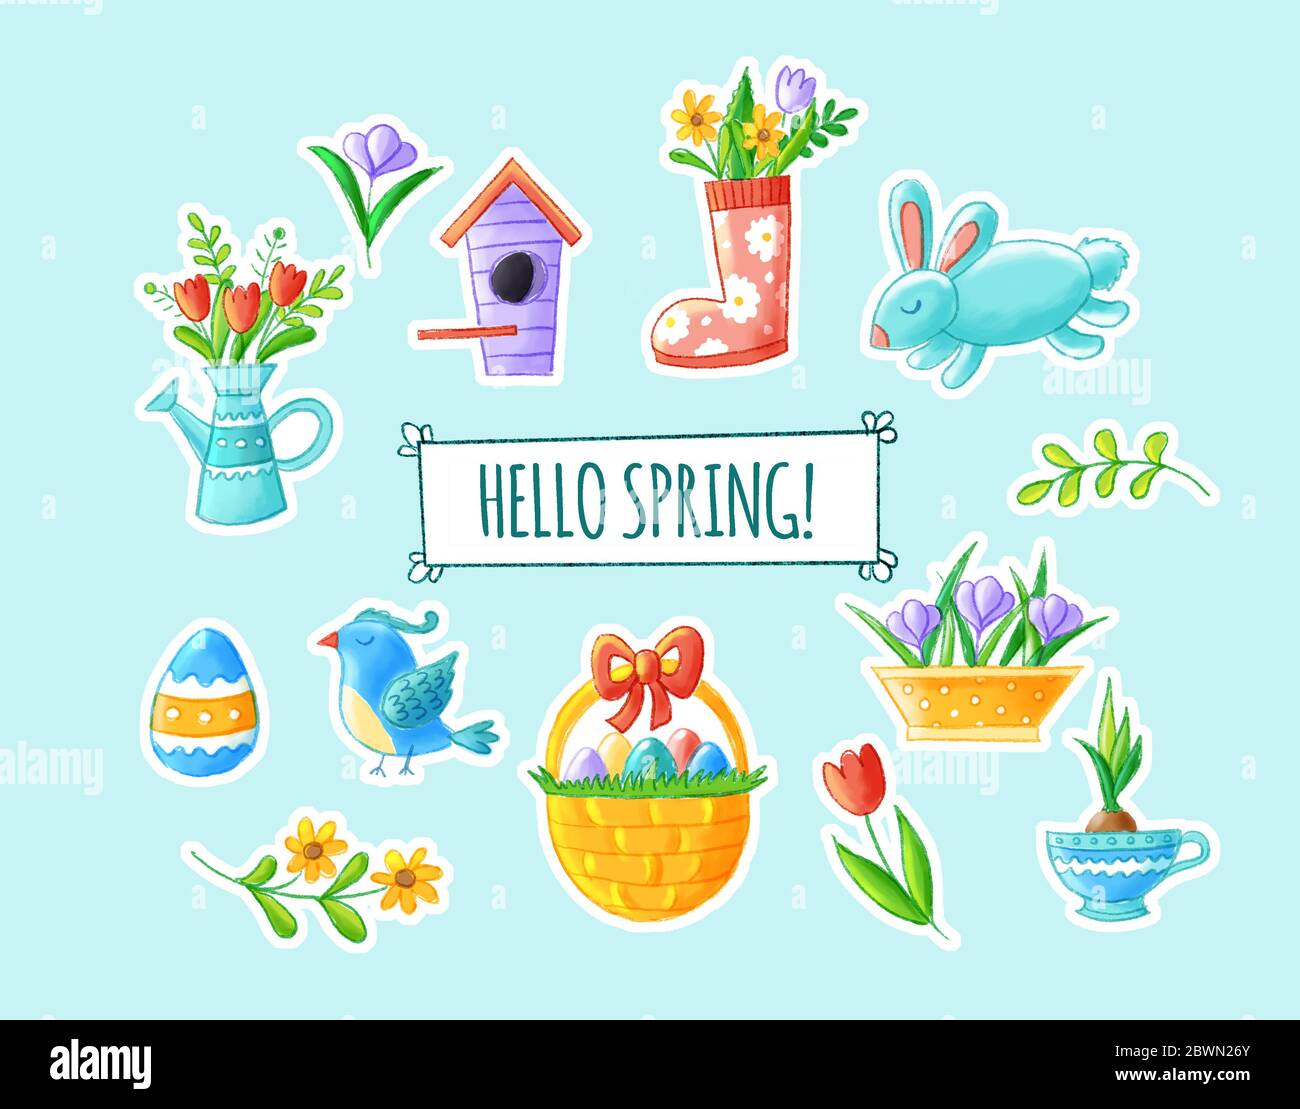 Hello spring hand drawn element collection - cute flowers, bird, bunny, easter eggs, watering can, nesting box, seasonal illustrations. Isolated on Stock Photo